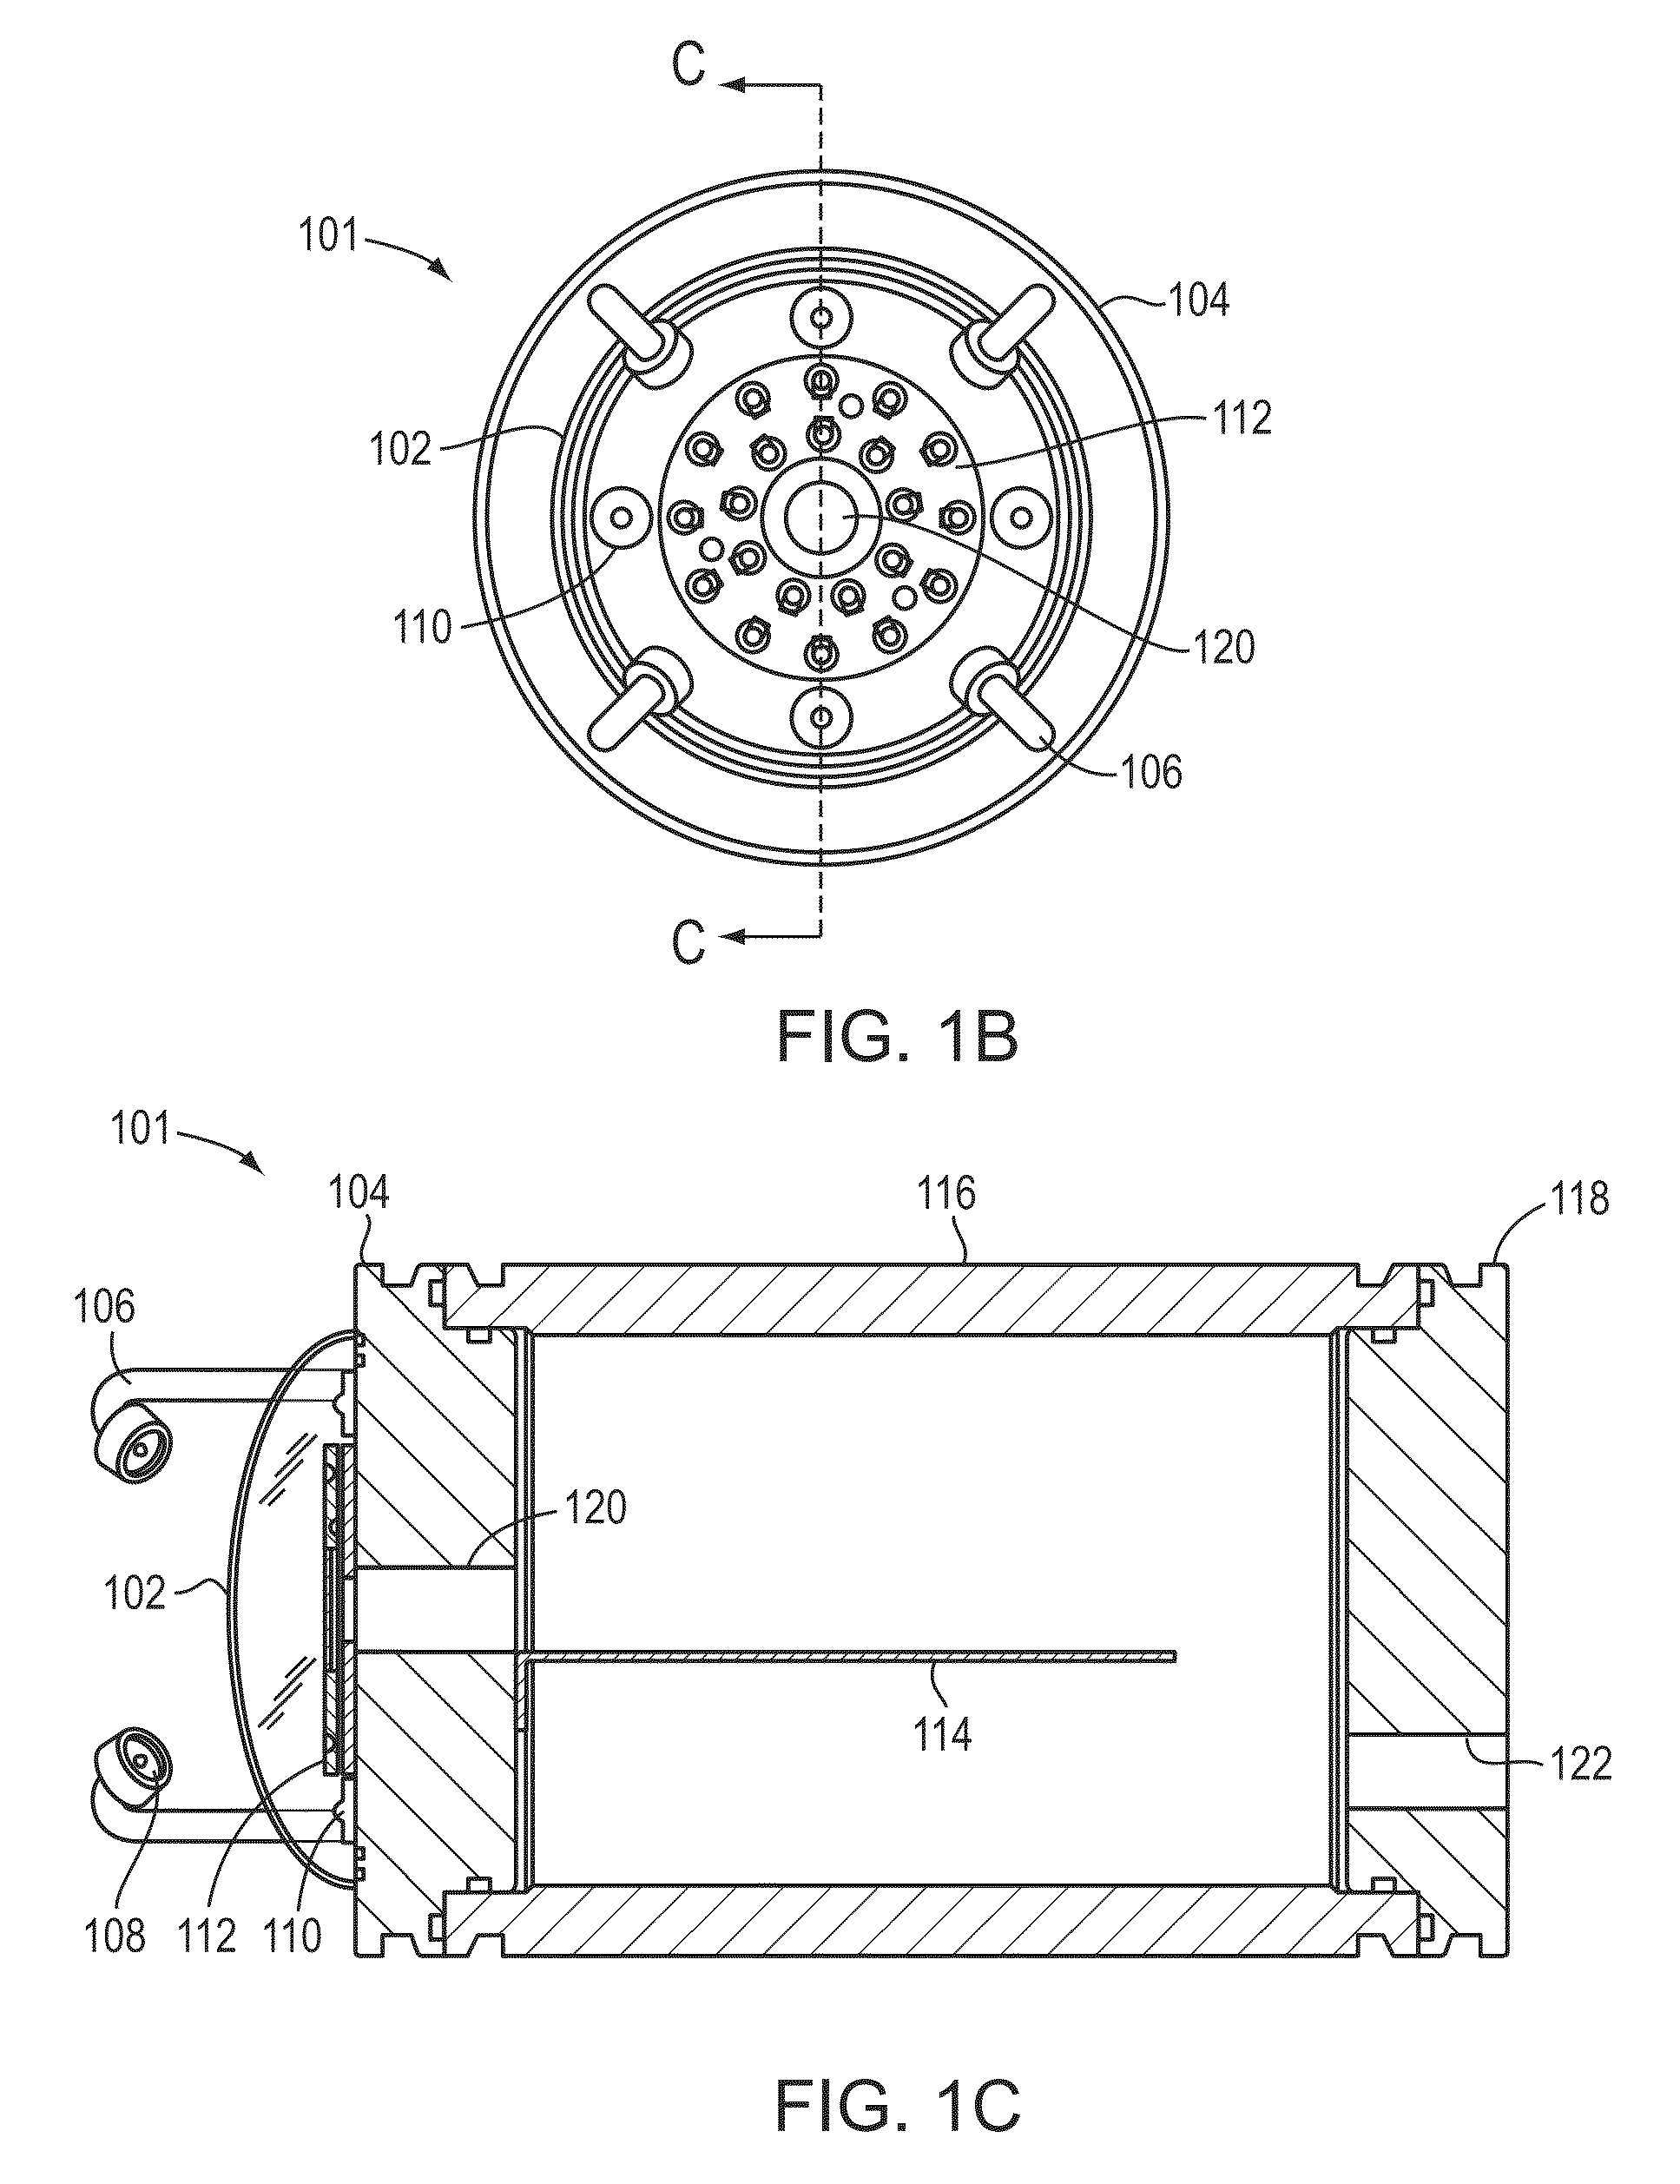 Marine environment antifouling system and methods